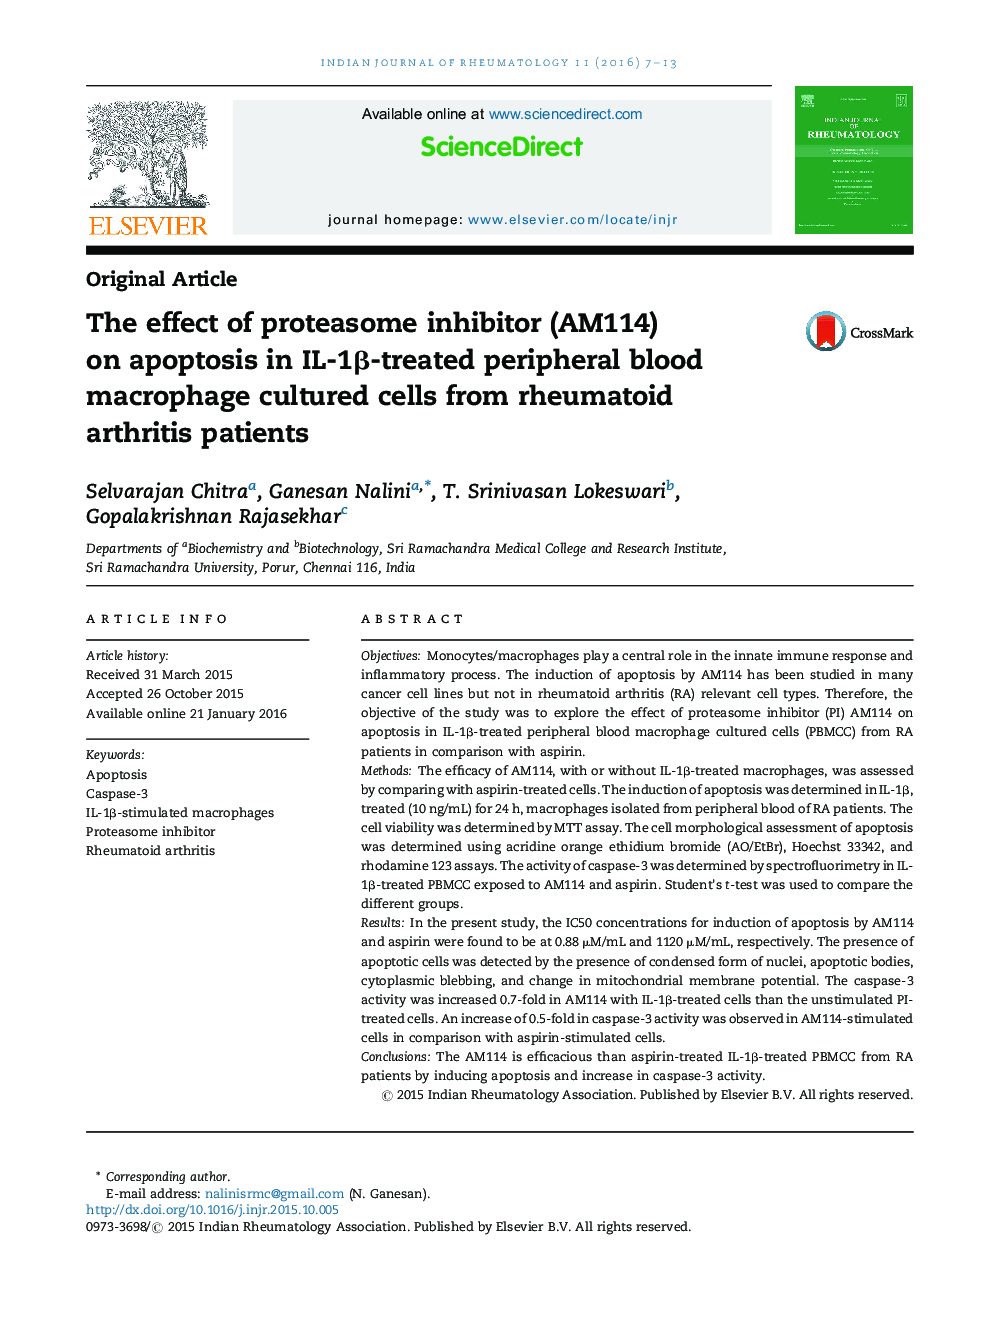 The effect of proteasome inhibitor (AM114) on apoptosis in IL-1Î²-treated peripheral blood macrophage cultured cells from rheumatoid arthritis patients